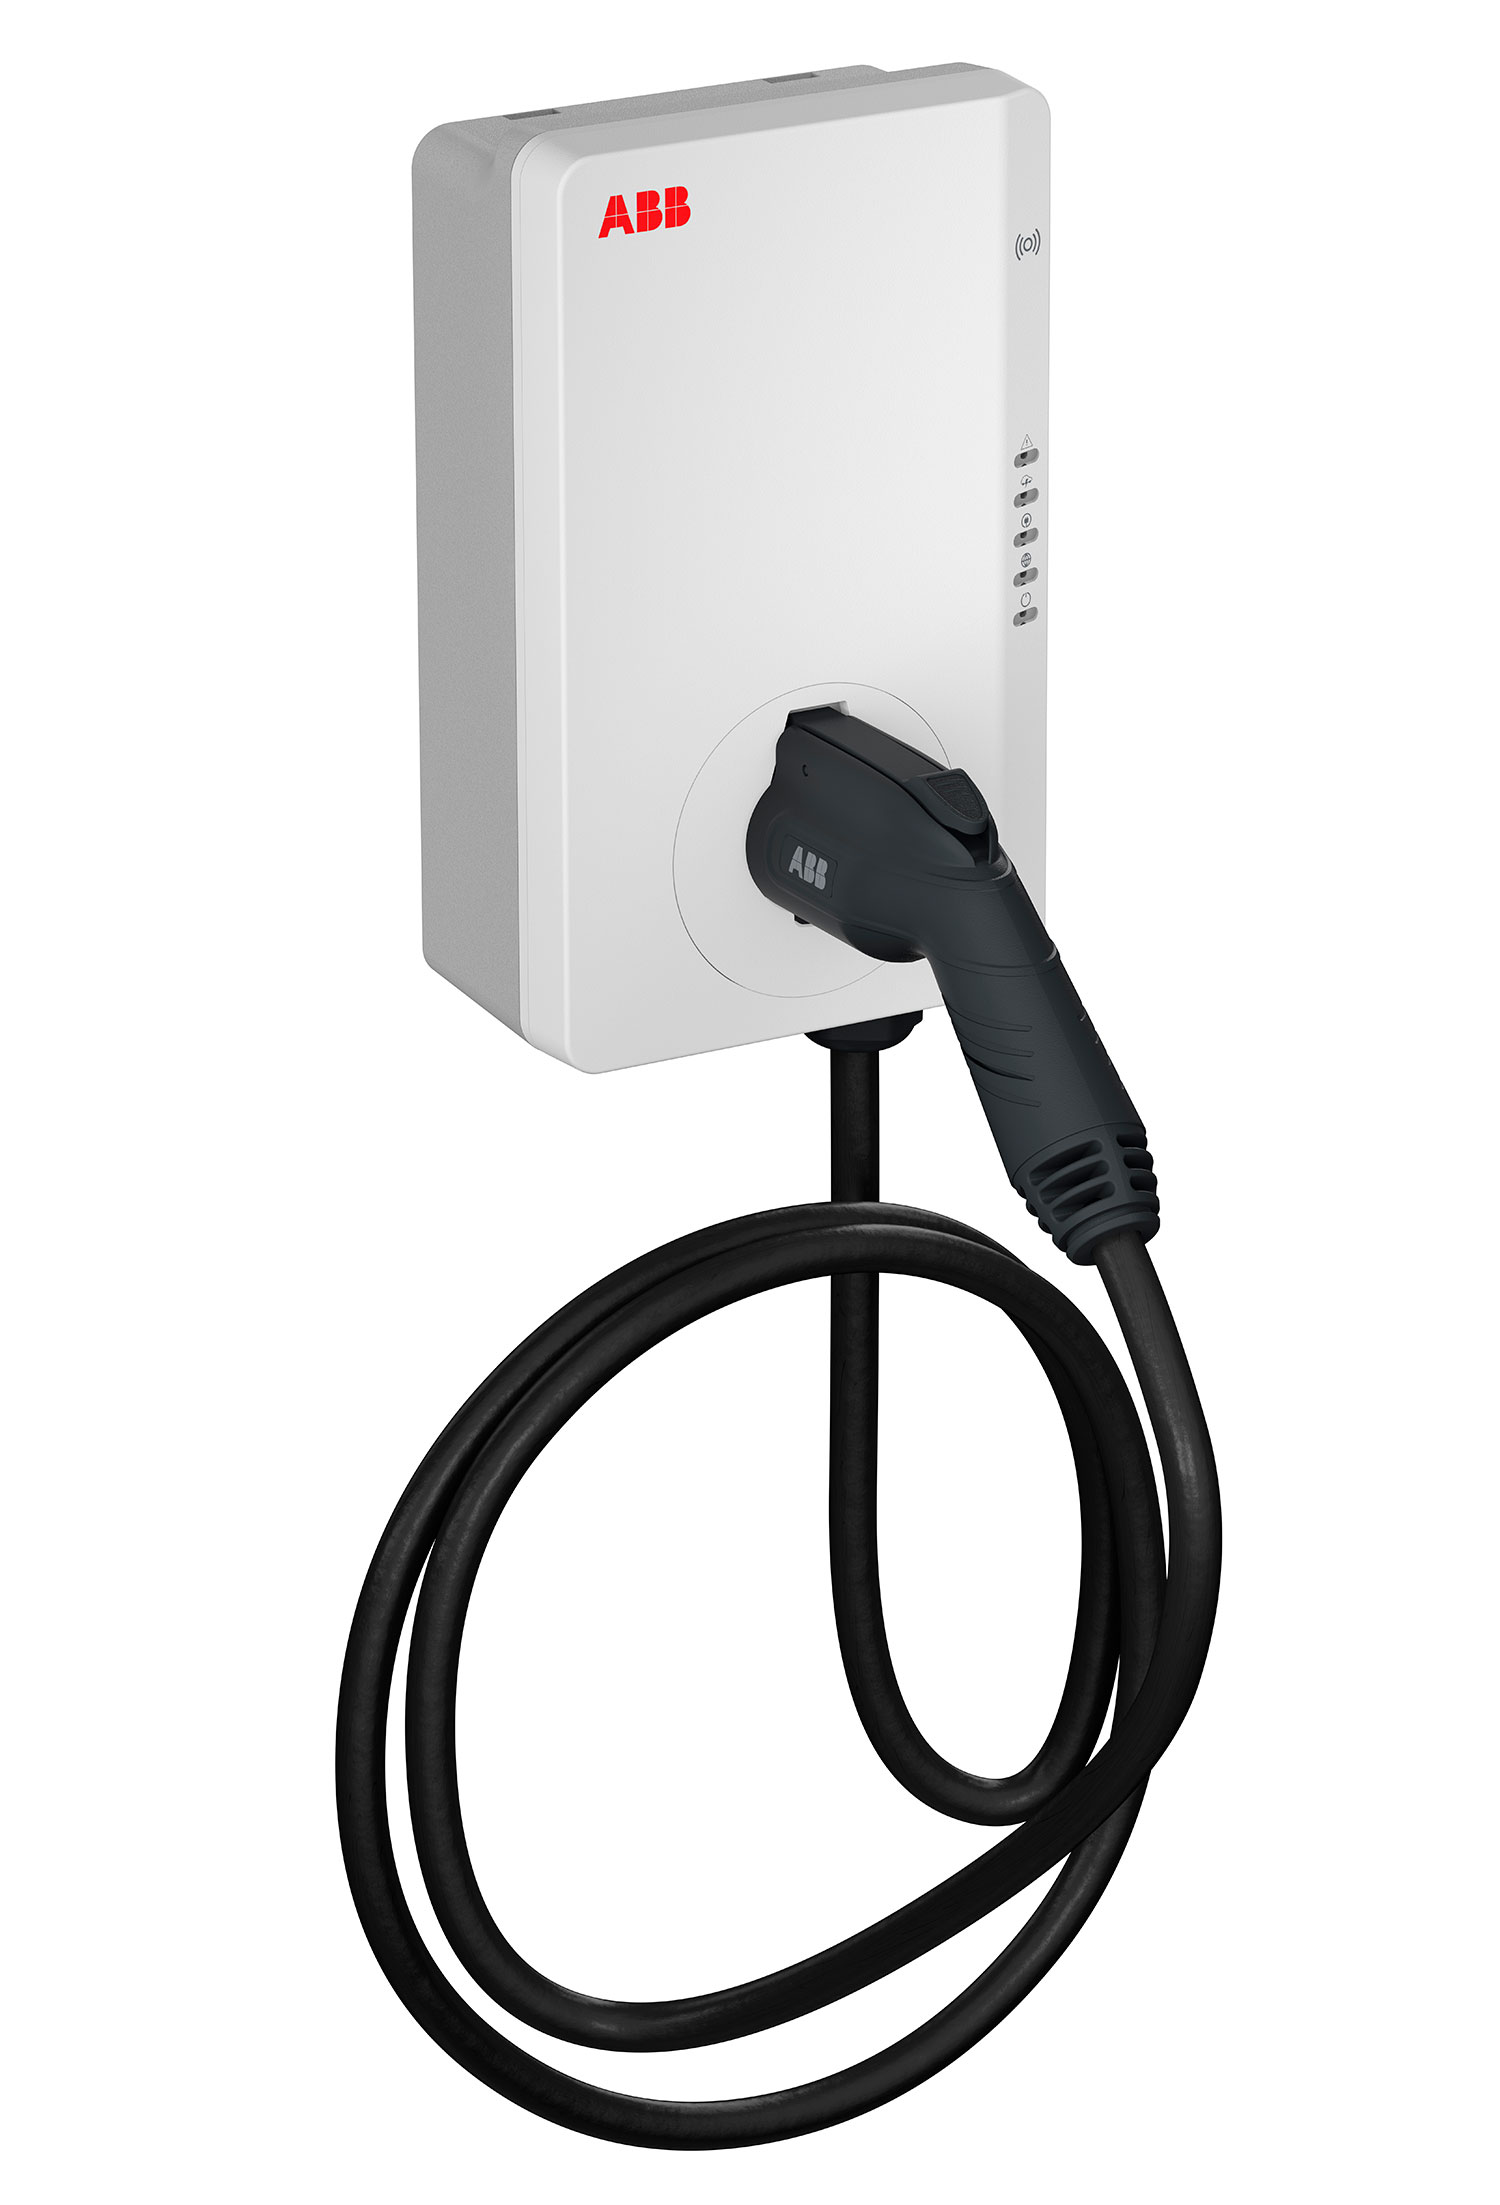 ABB Juno Type1 cable HR ABB Terra AC 11kW EV Charger